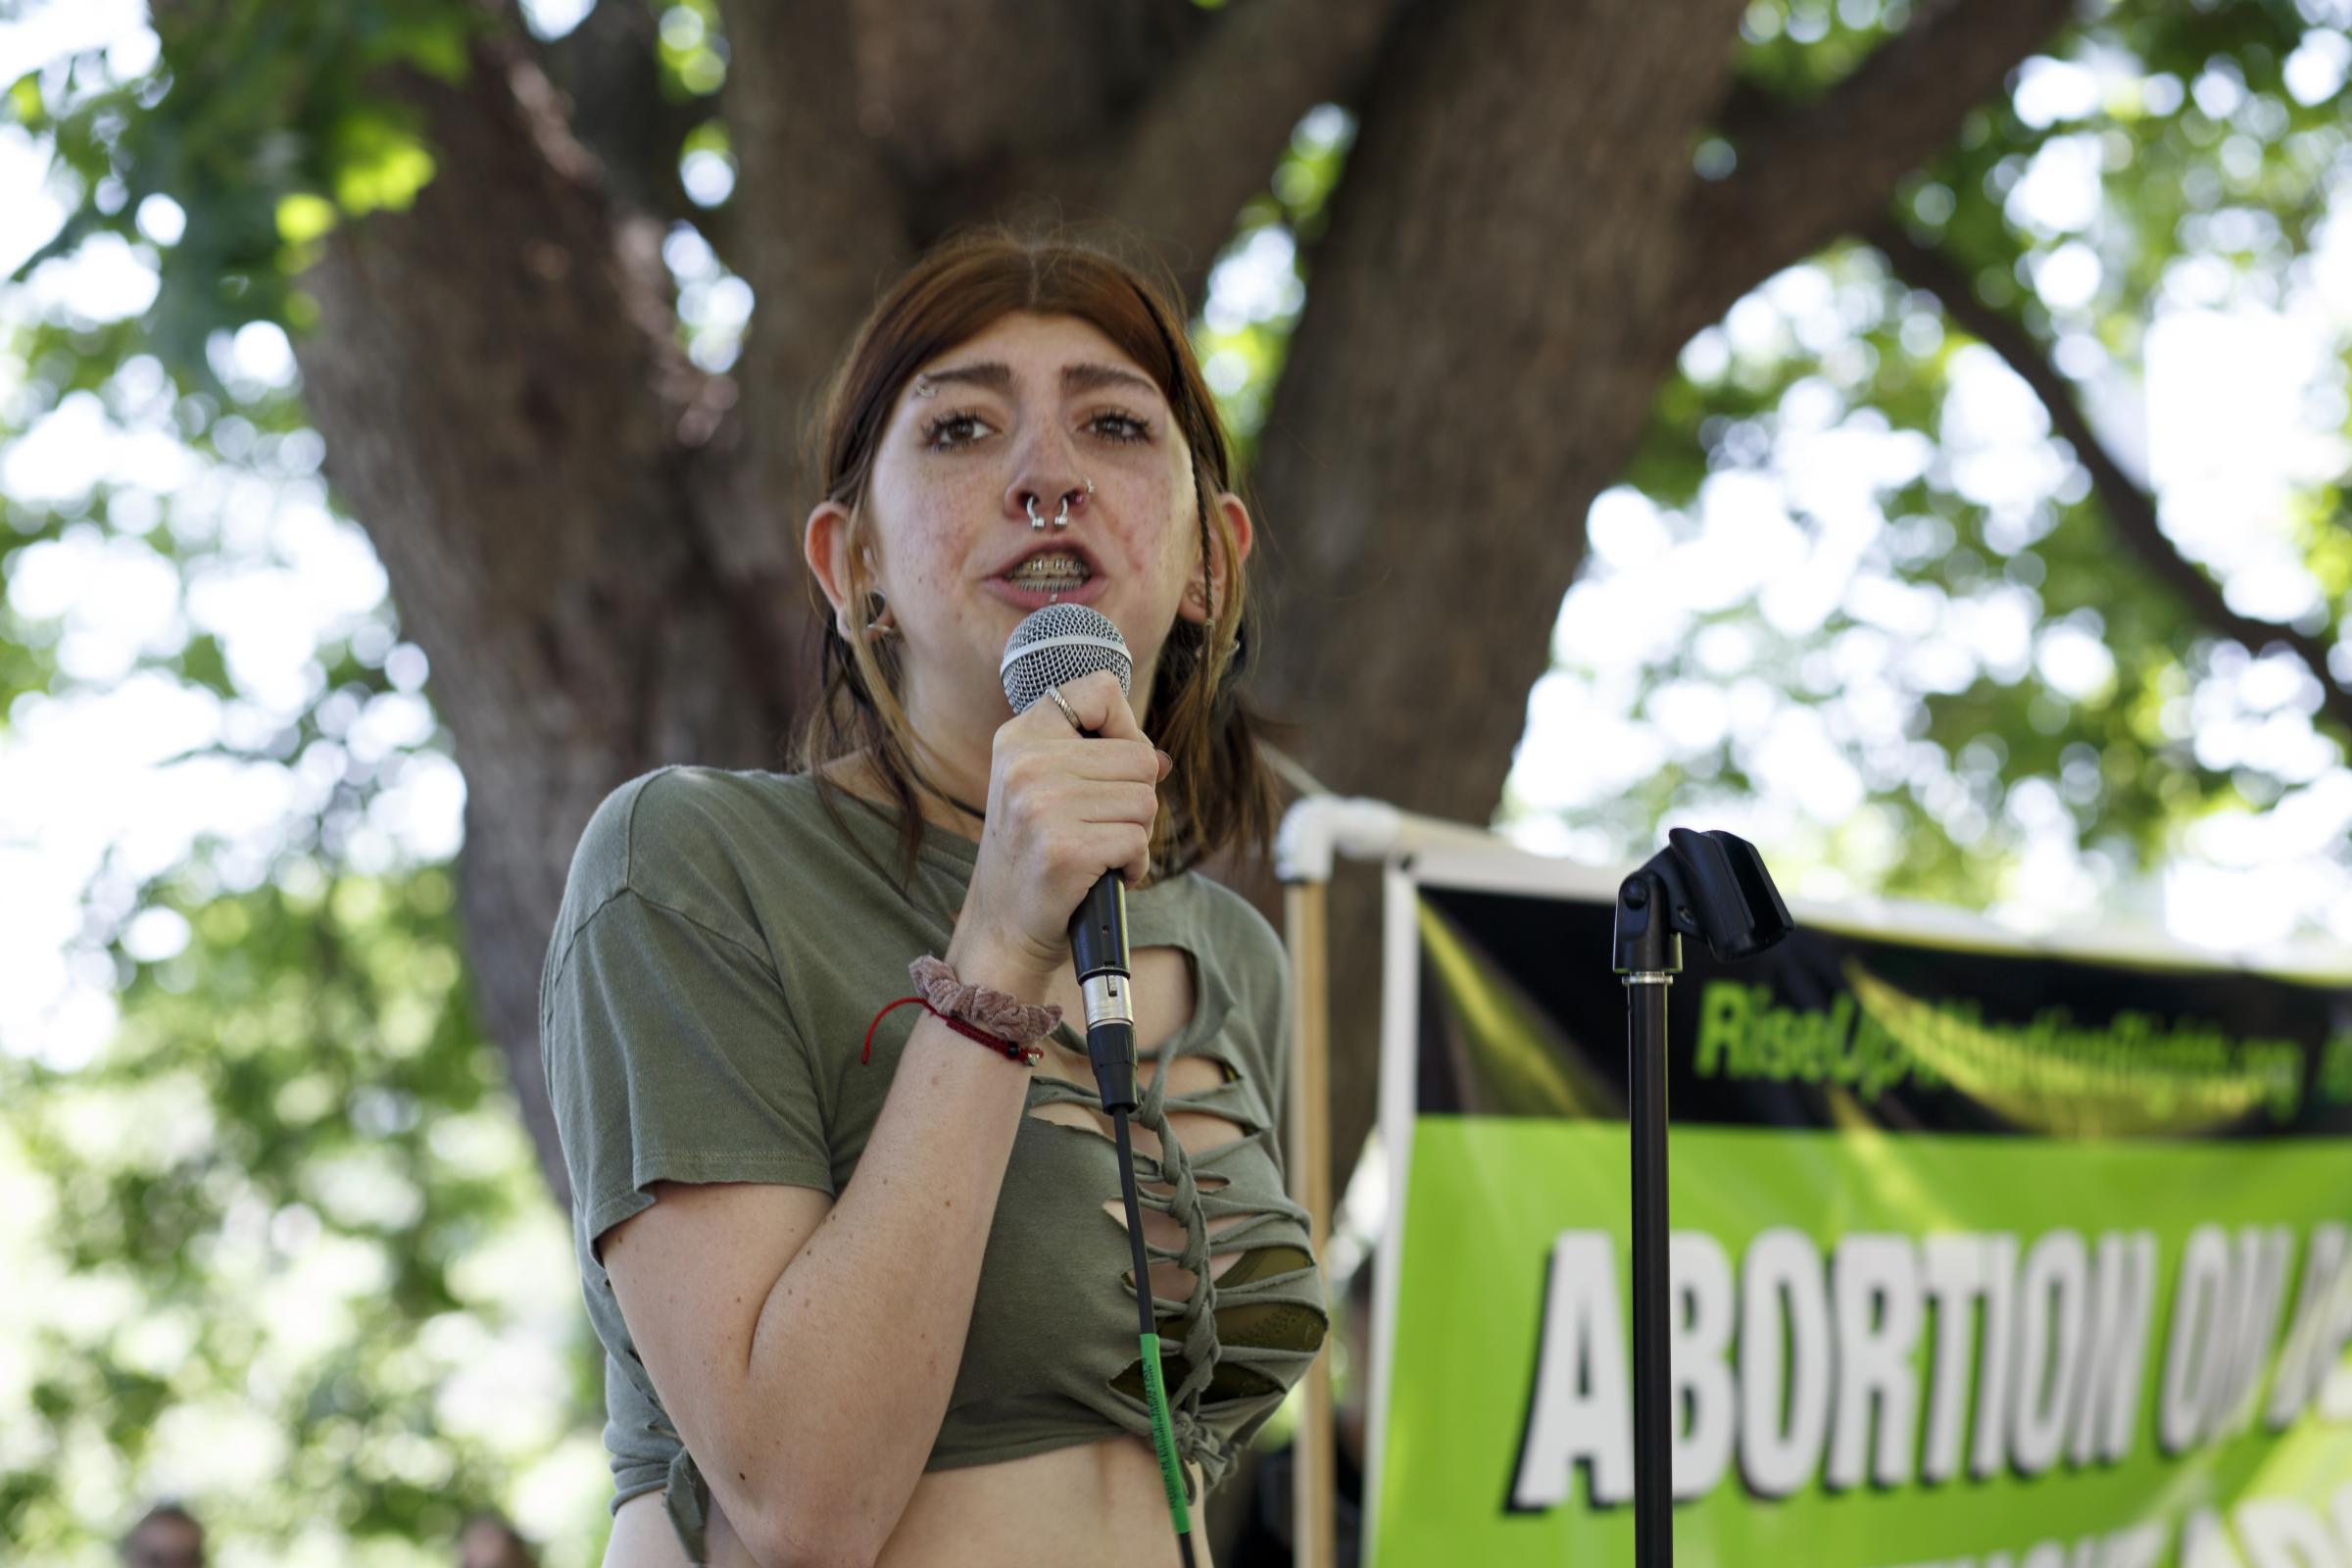 Abortion Rights Protest Austin Texas - Abortion Rights activist Zoe speaks to the gatering at Buford Tower on Cesar Chavez Street in...